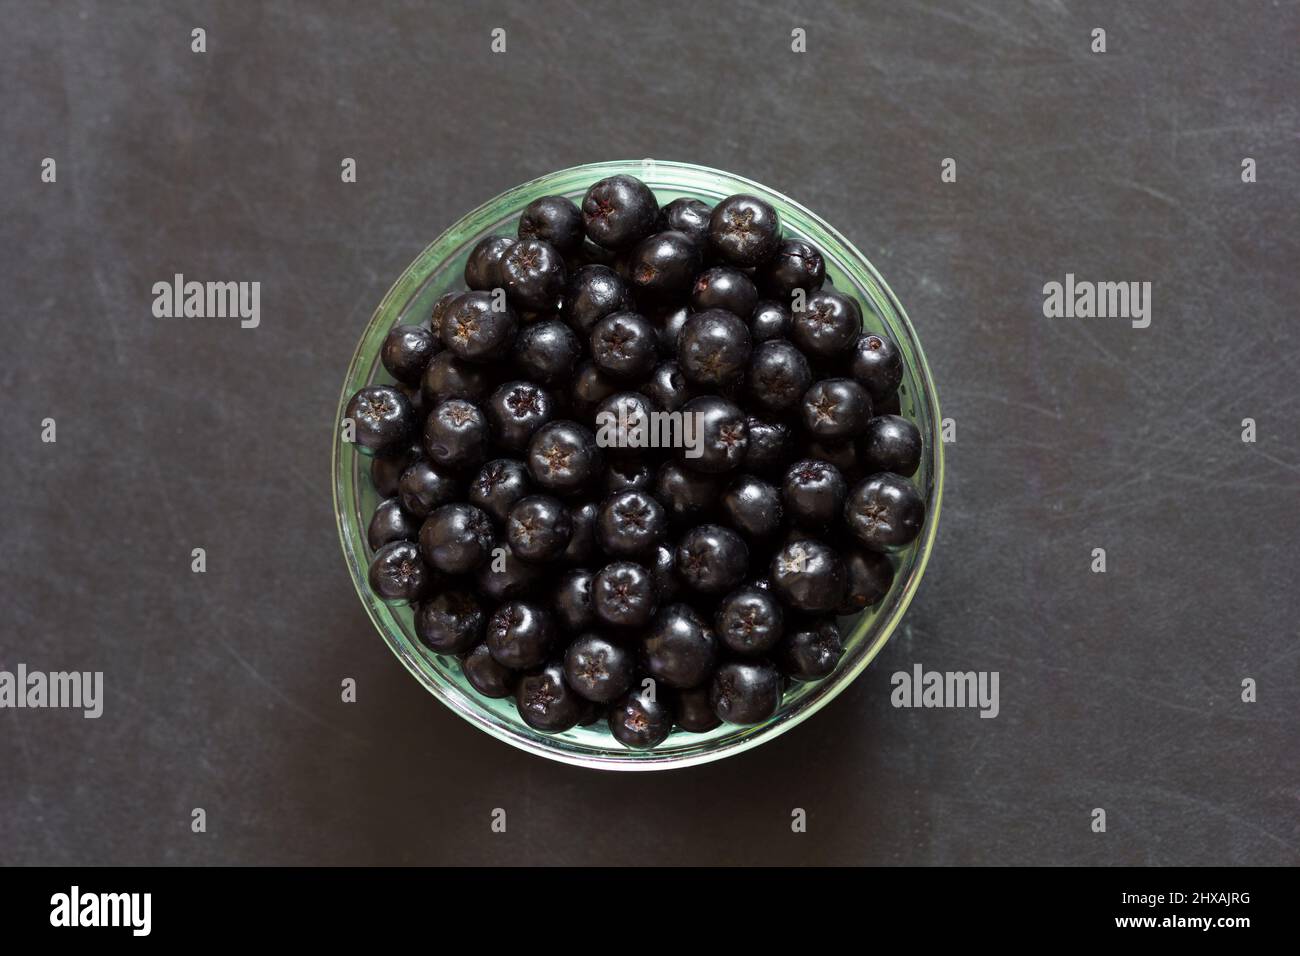 Top view of chokeberries in glass bowl on the black background Stock Photo